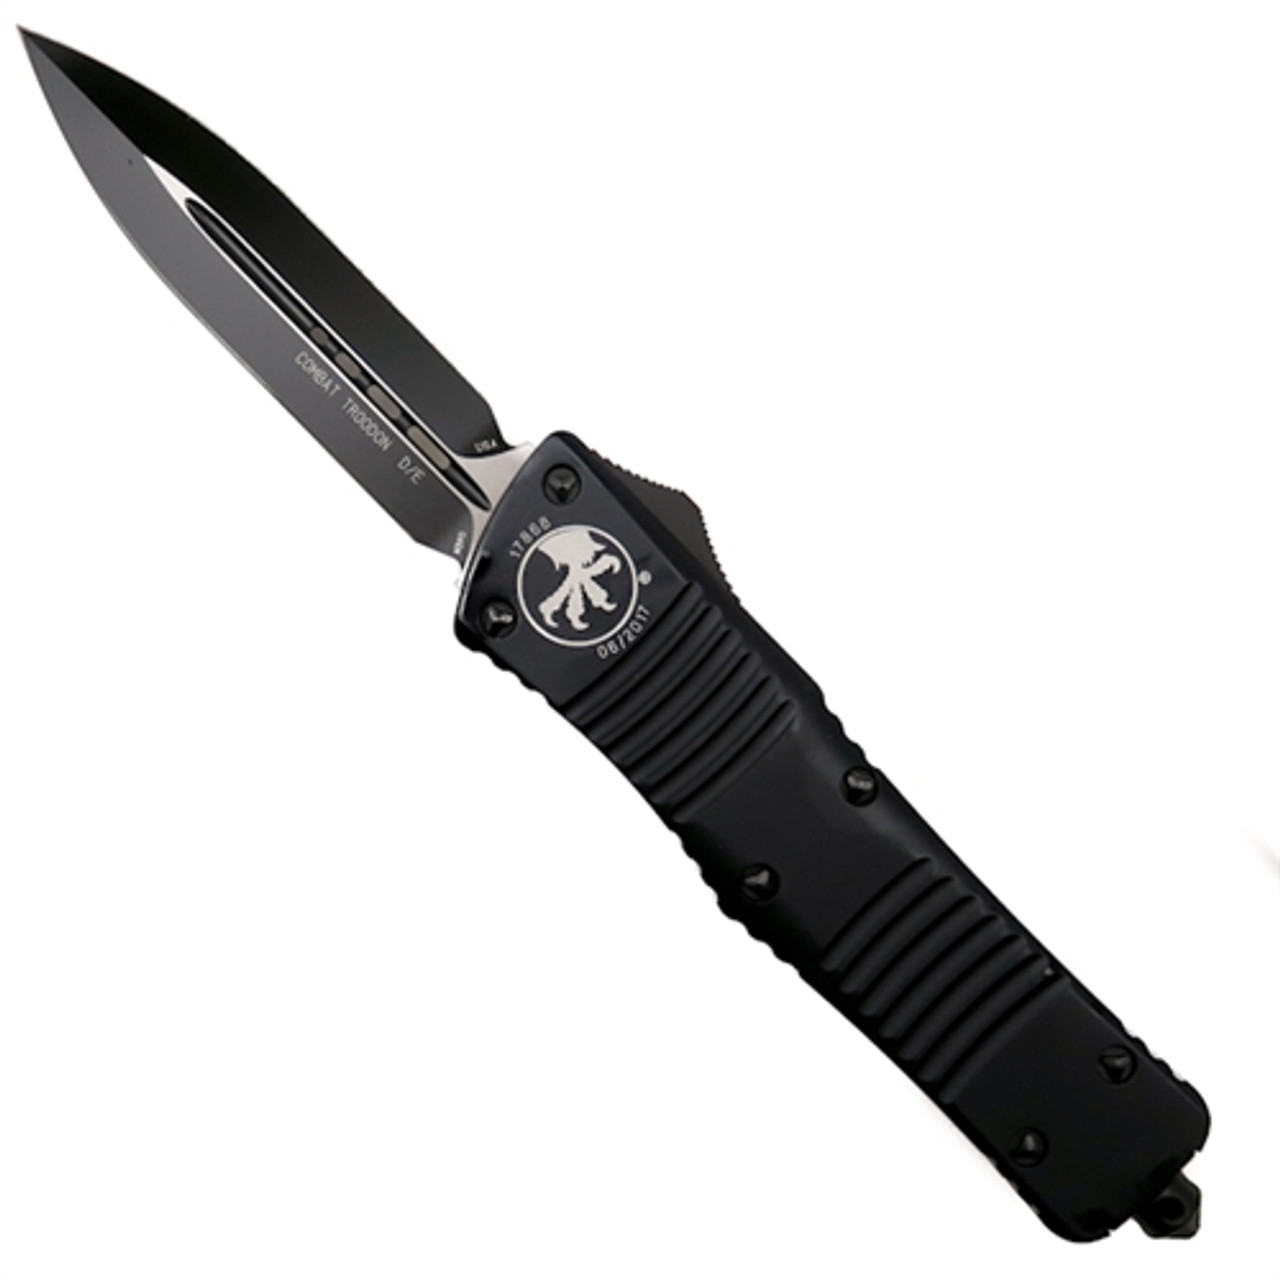 Microtech combat. Microtech Combat Troodon s/e. Microtech Combat Troodon t e. Microtech Combat Troodon tanto Tactical. Microtech Combat Troodon Hellhound.